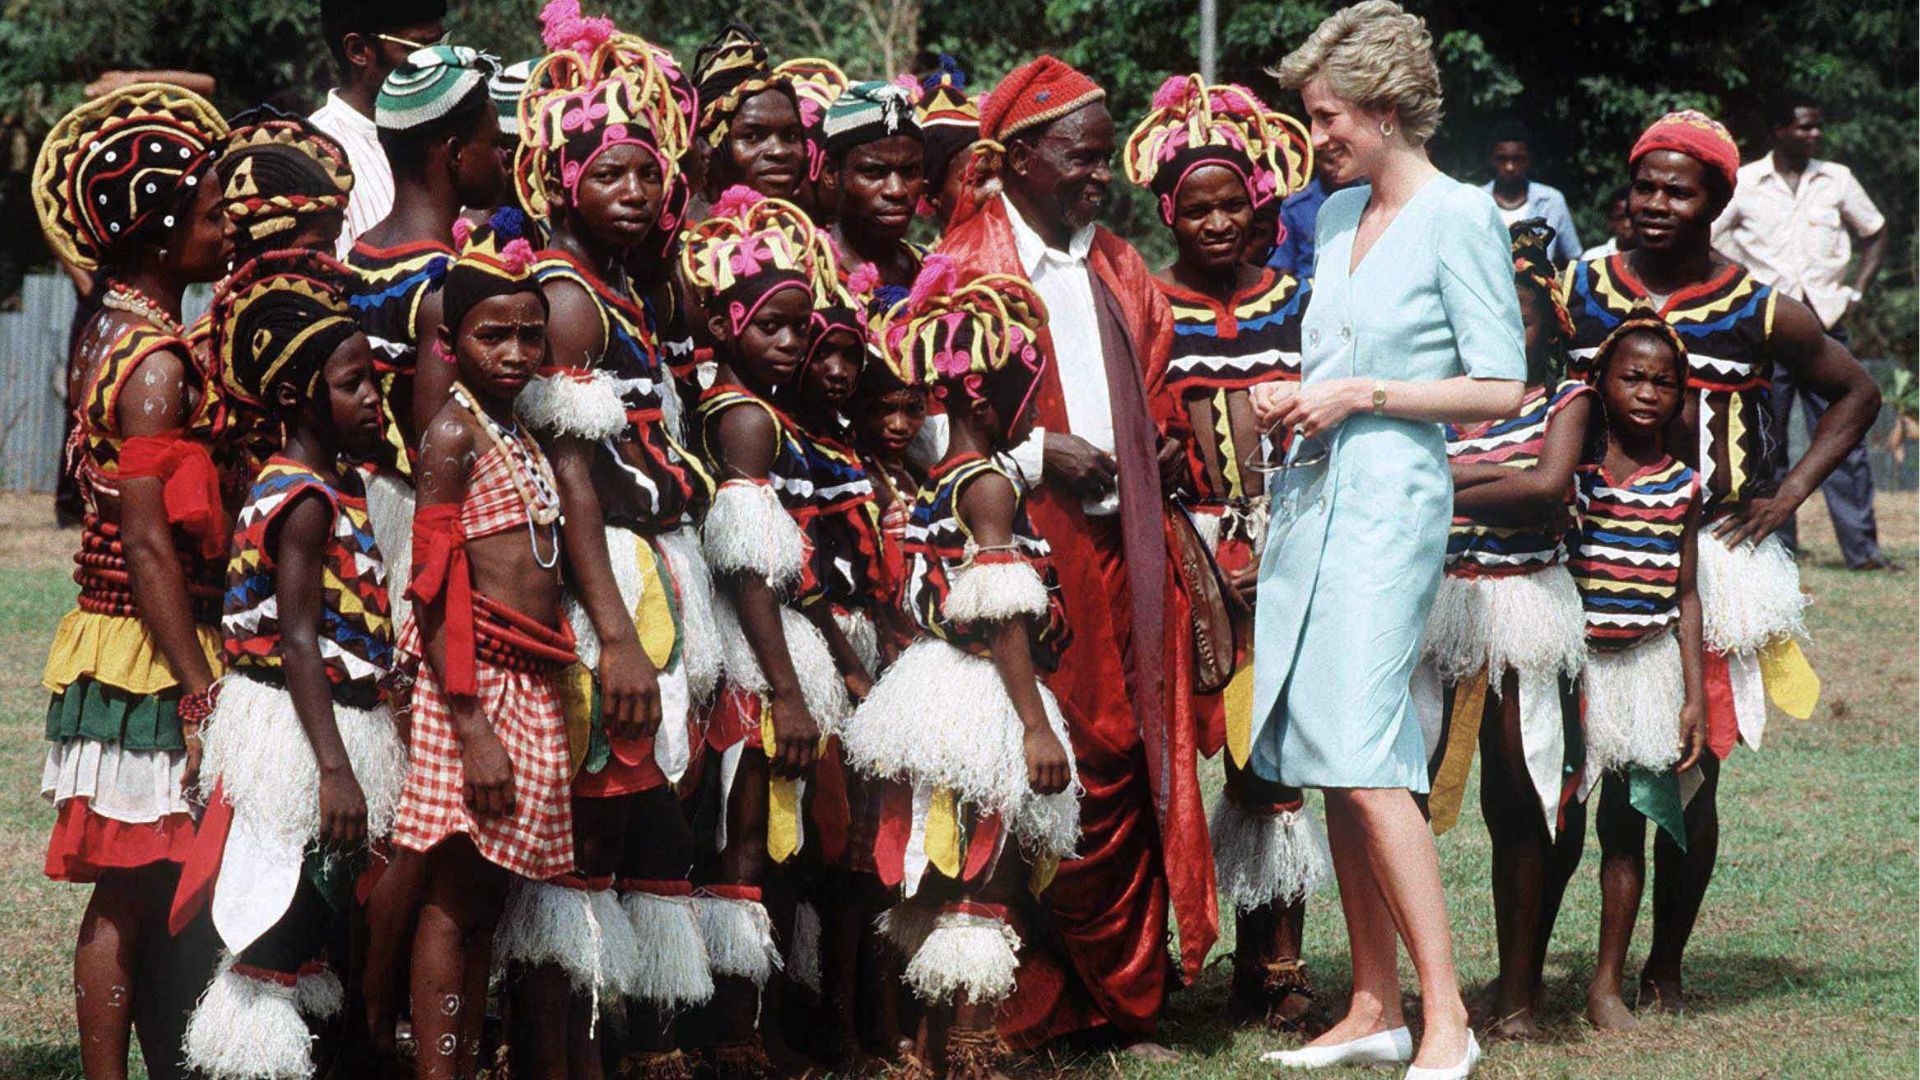 <p>                     Known as a major coal mining centre, Nigeria’s Enugu captured Princess Diana’s heart when she visited in 1990. Wearing a pale blue Catherine Walker dress with white pumps and her trademark gold earrings the people’s princess talked with the local community after watching a show performed especially for her visit. During her time in the West African country, Diana particularly enjoyed the company of Maryam Babangida, the First Lady of Nigeria, and the pair were seen laughing and chatting on many occasions throughout the trip.                   </p>